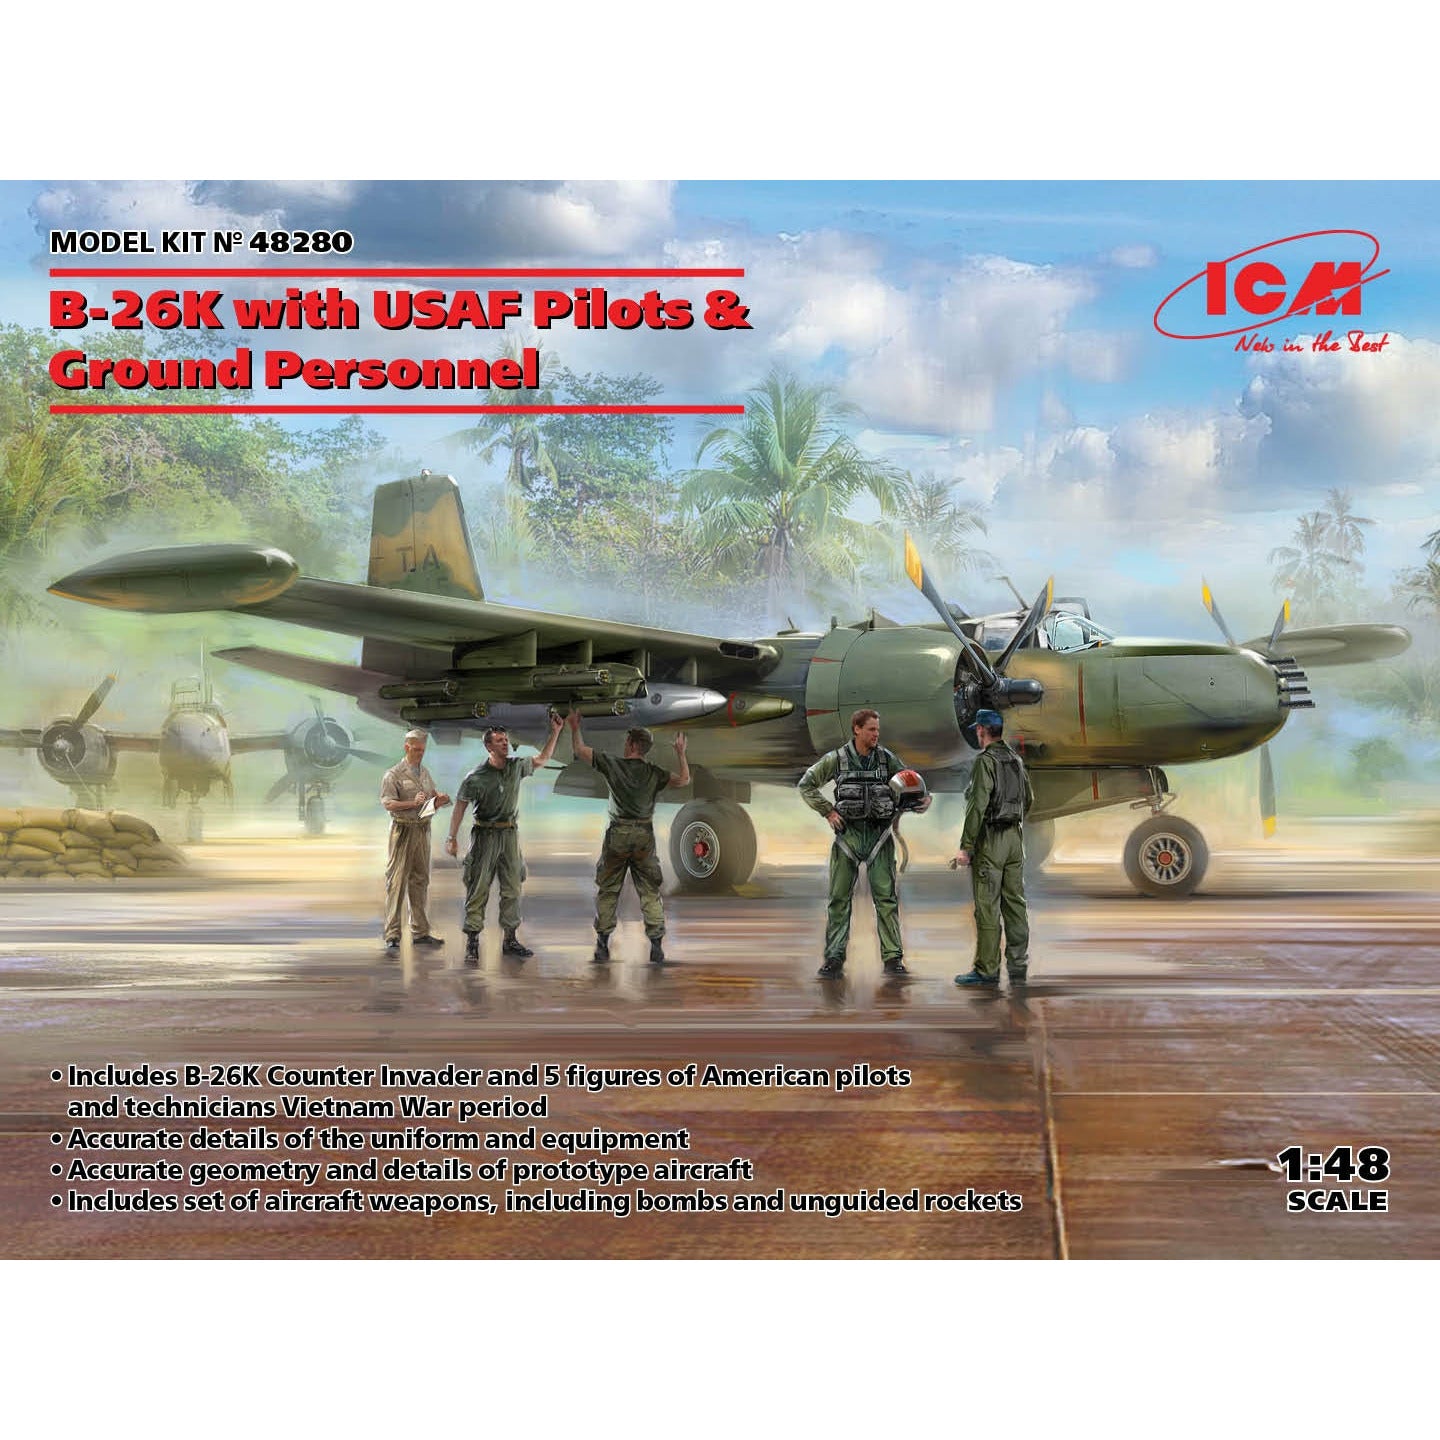 B-26K with USAF Pilots & Ground Personnel 1/48 #48280 by ICM